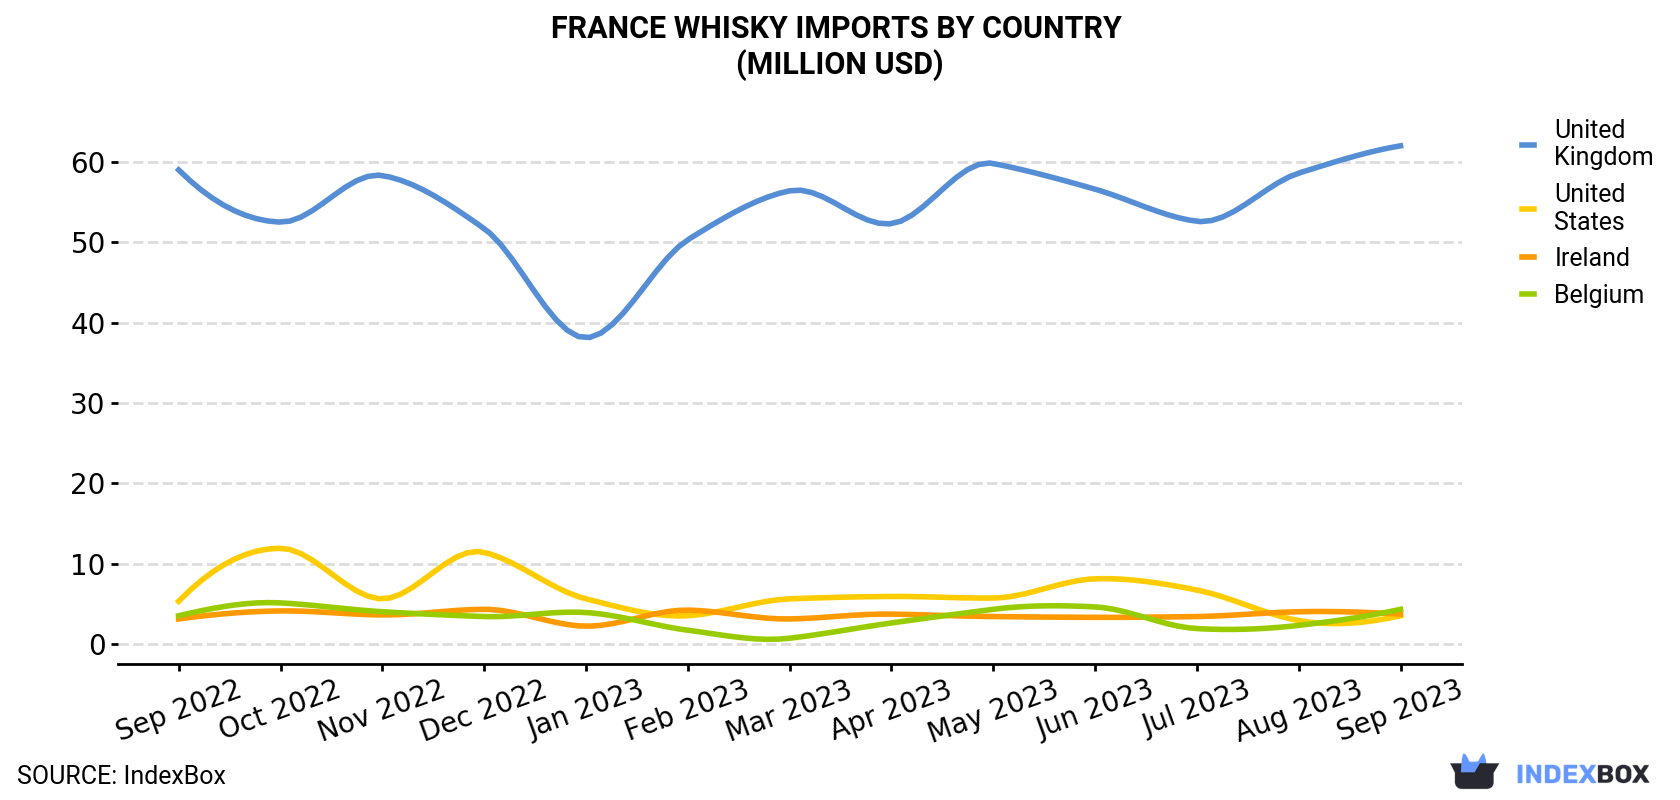 France Whisky Imports By Country (Million USD)